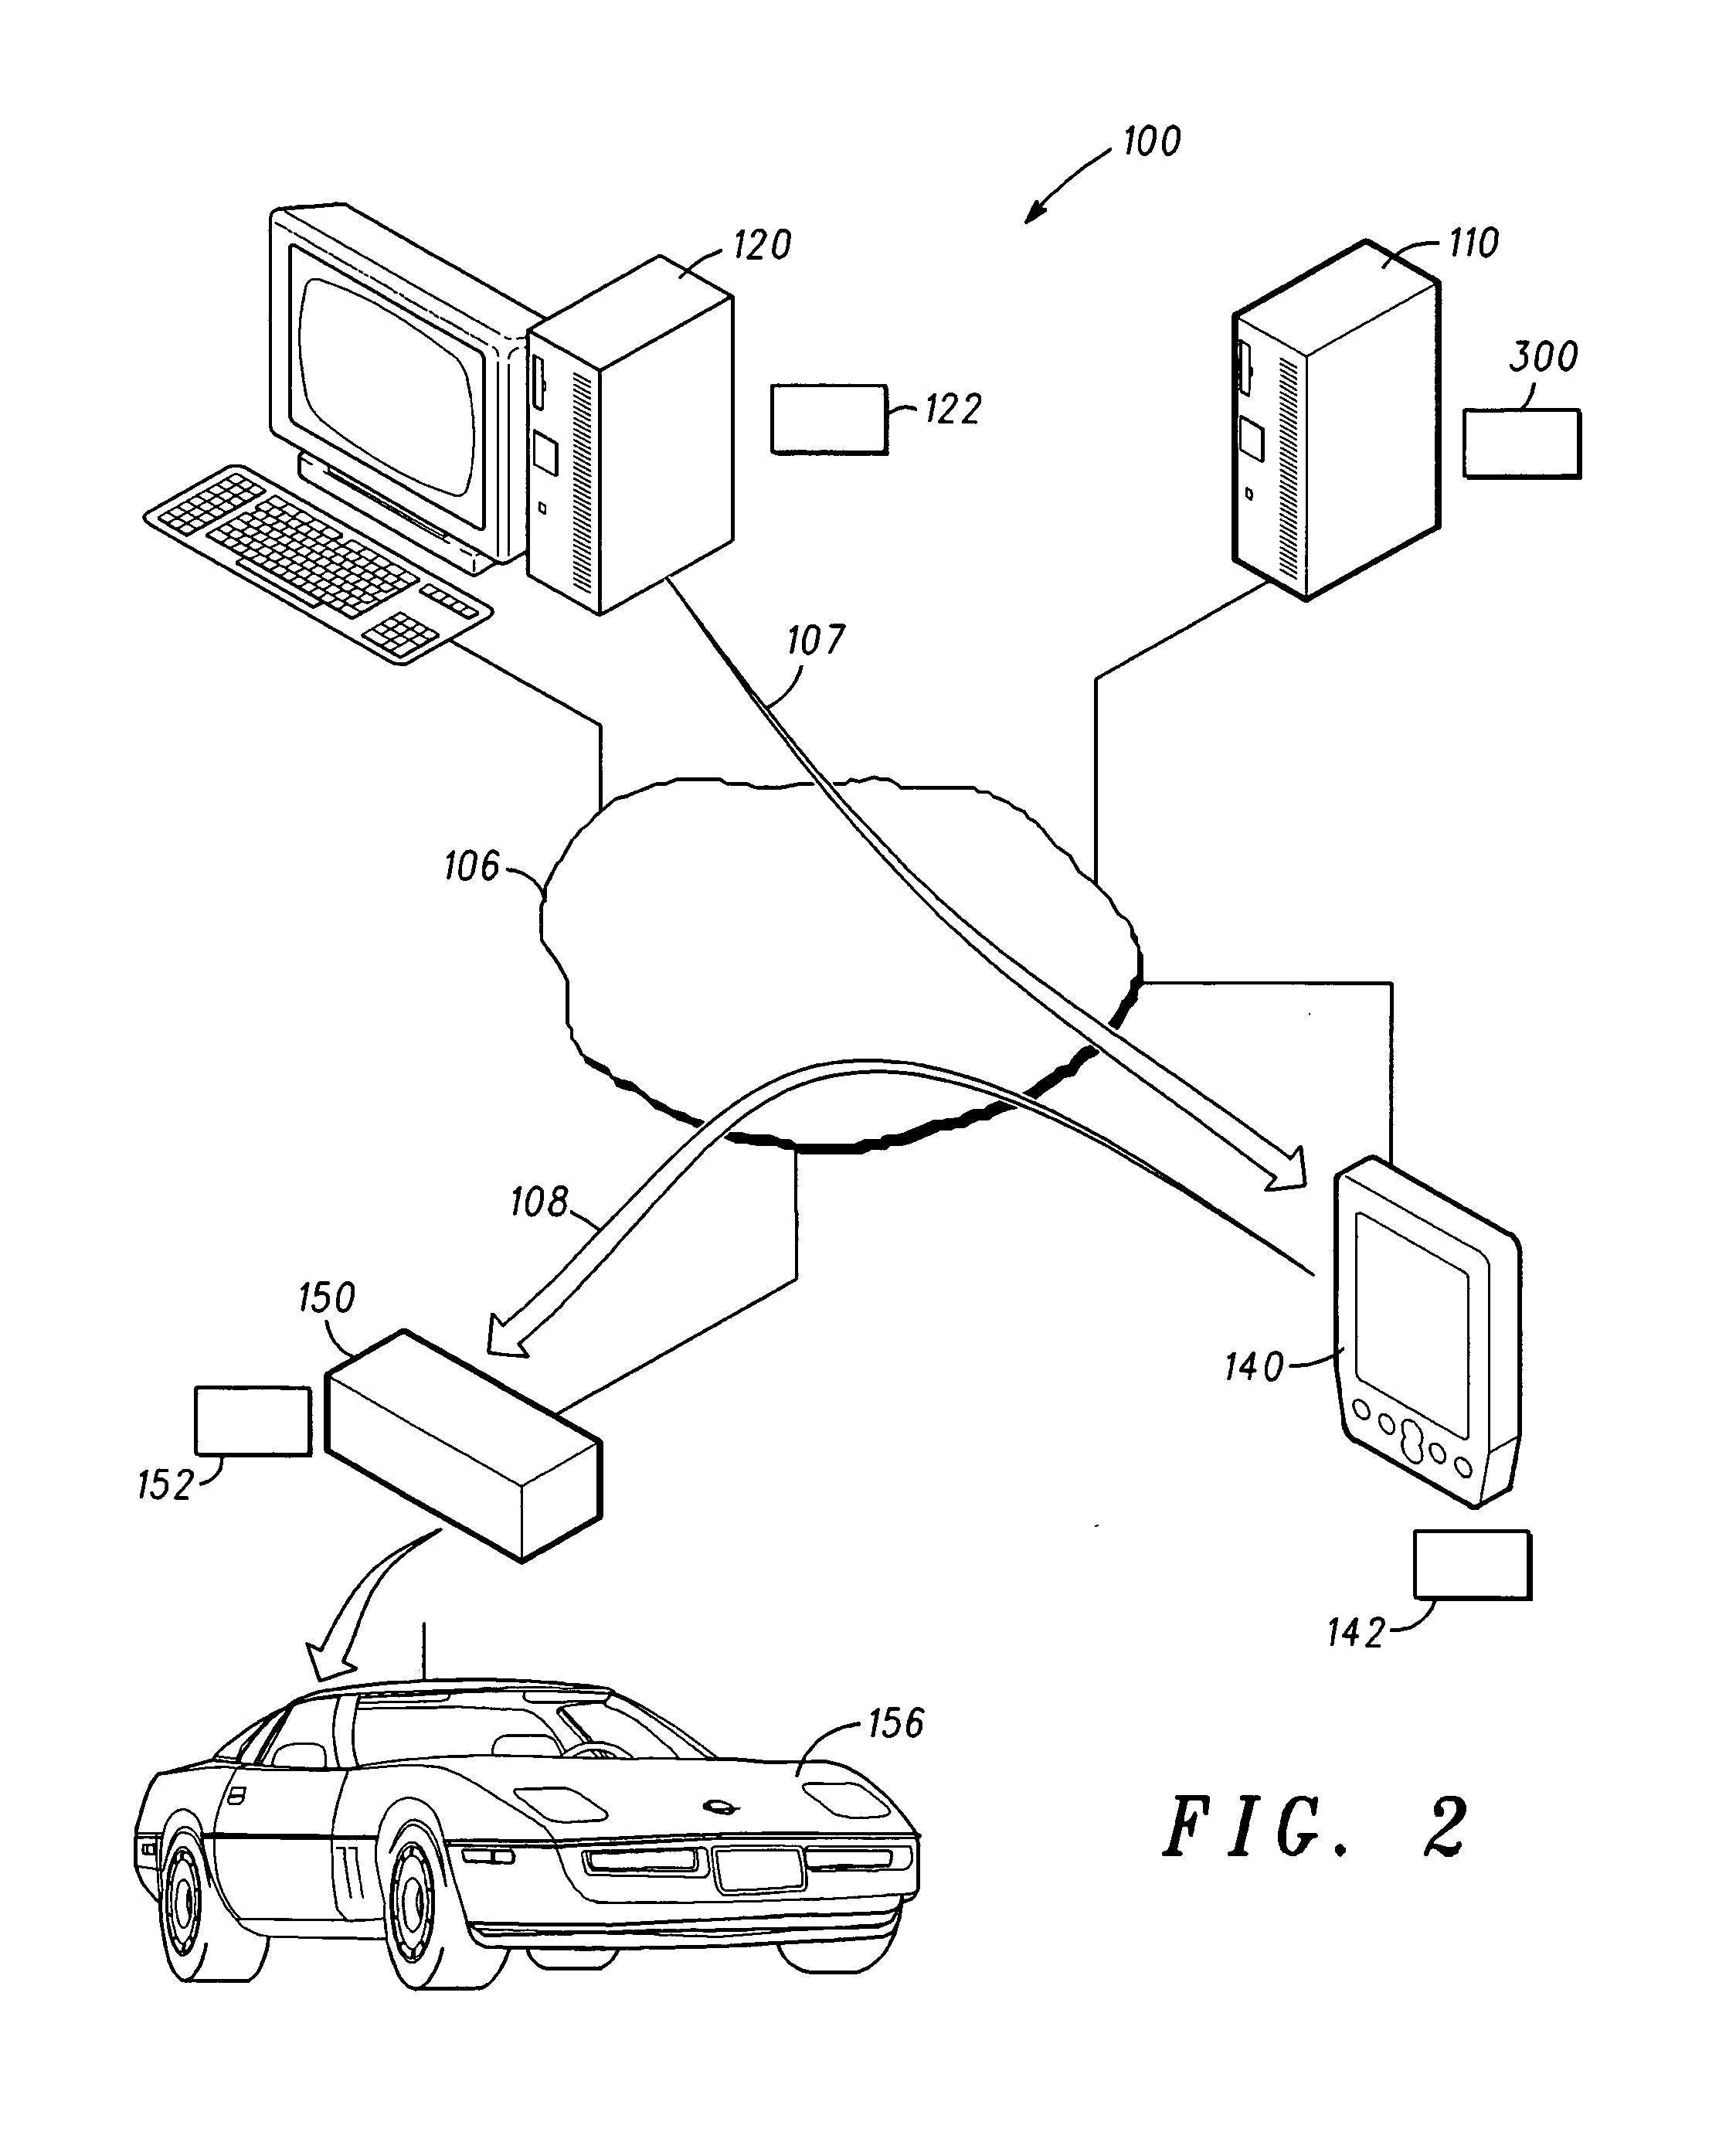 System and method for real-time processing and distribution of media content in a network of media devices